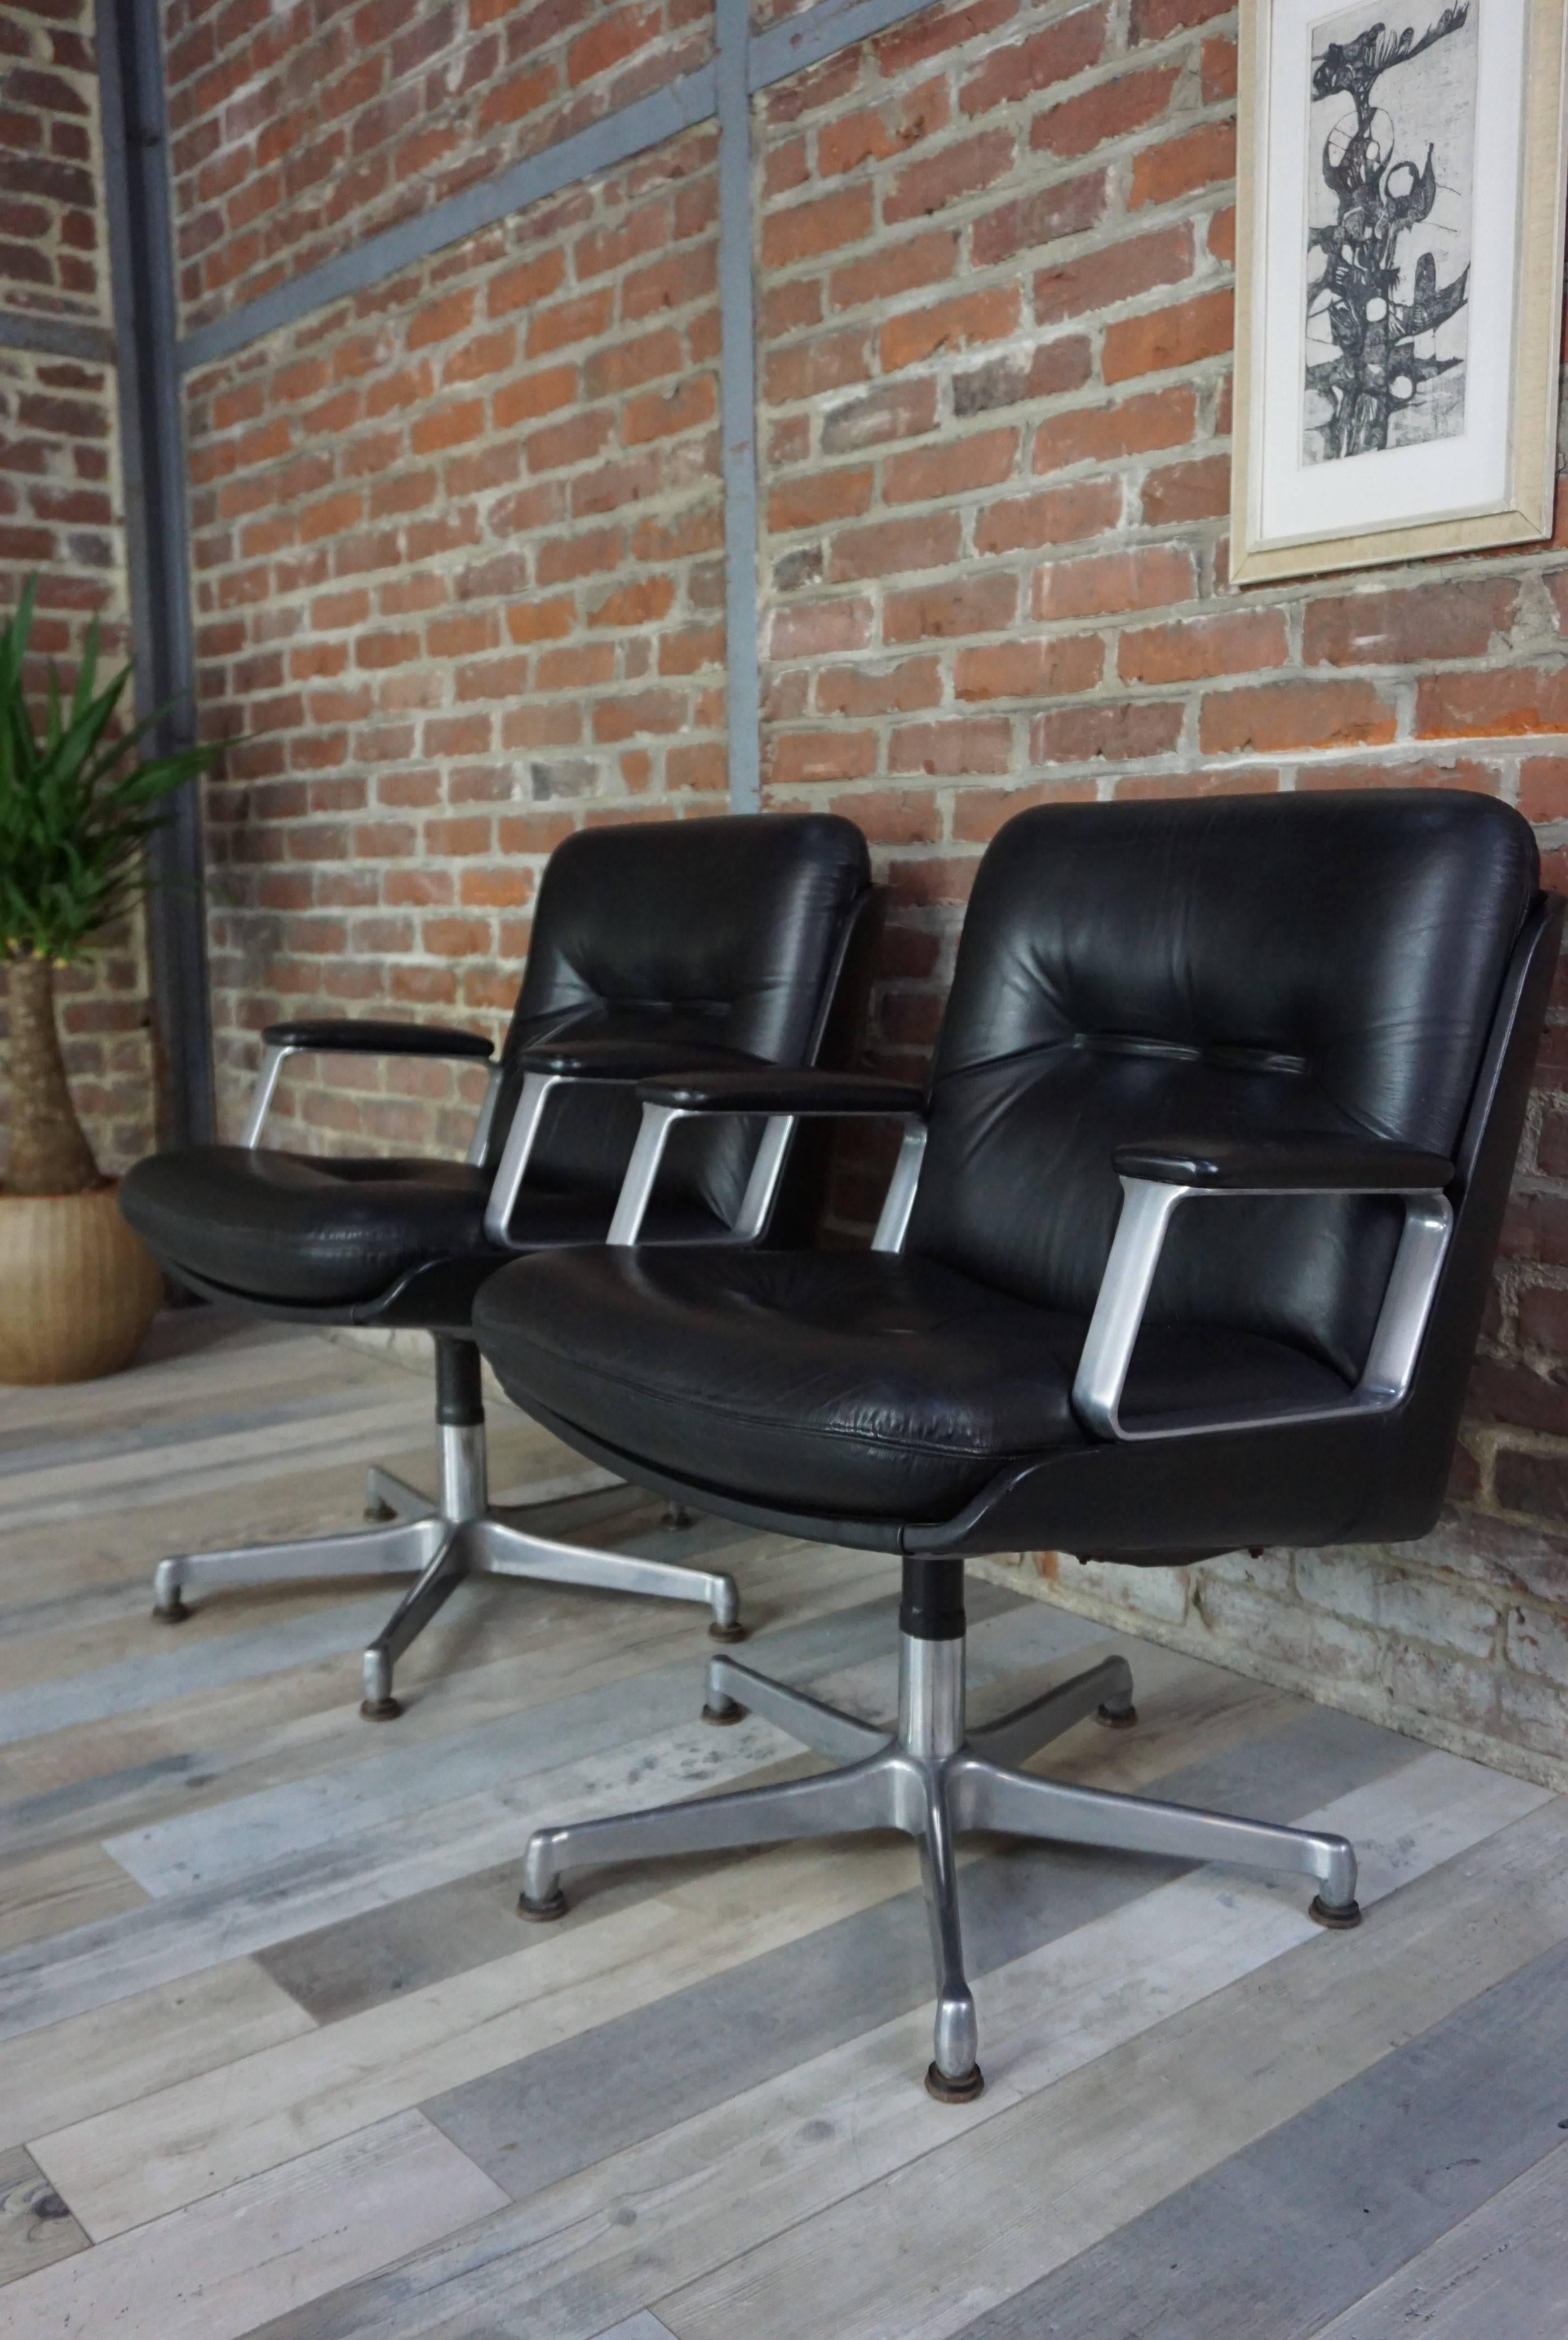 Pair of leather armchairs design by Vaghi, Italian manufacturer of high-end office chairs since 1964. These chairs are in black leather of excellent quality. Seat height 50 cm. They are not adjustable in height and are not pivotable.